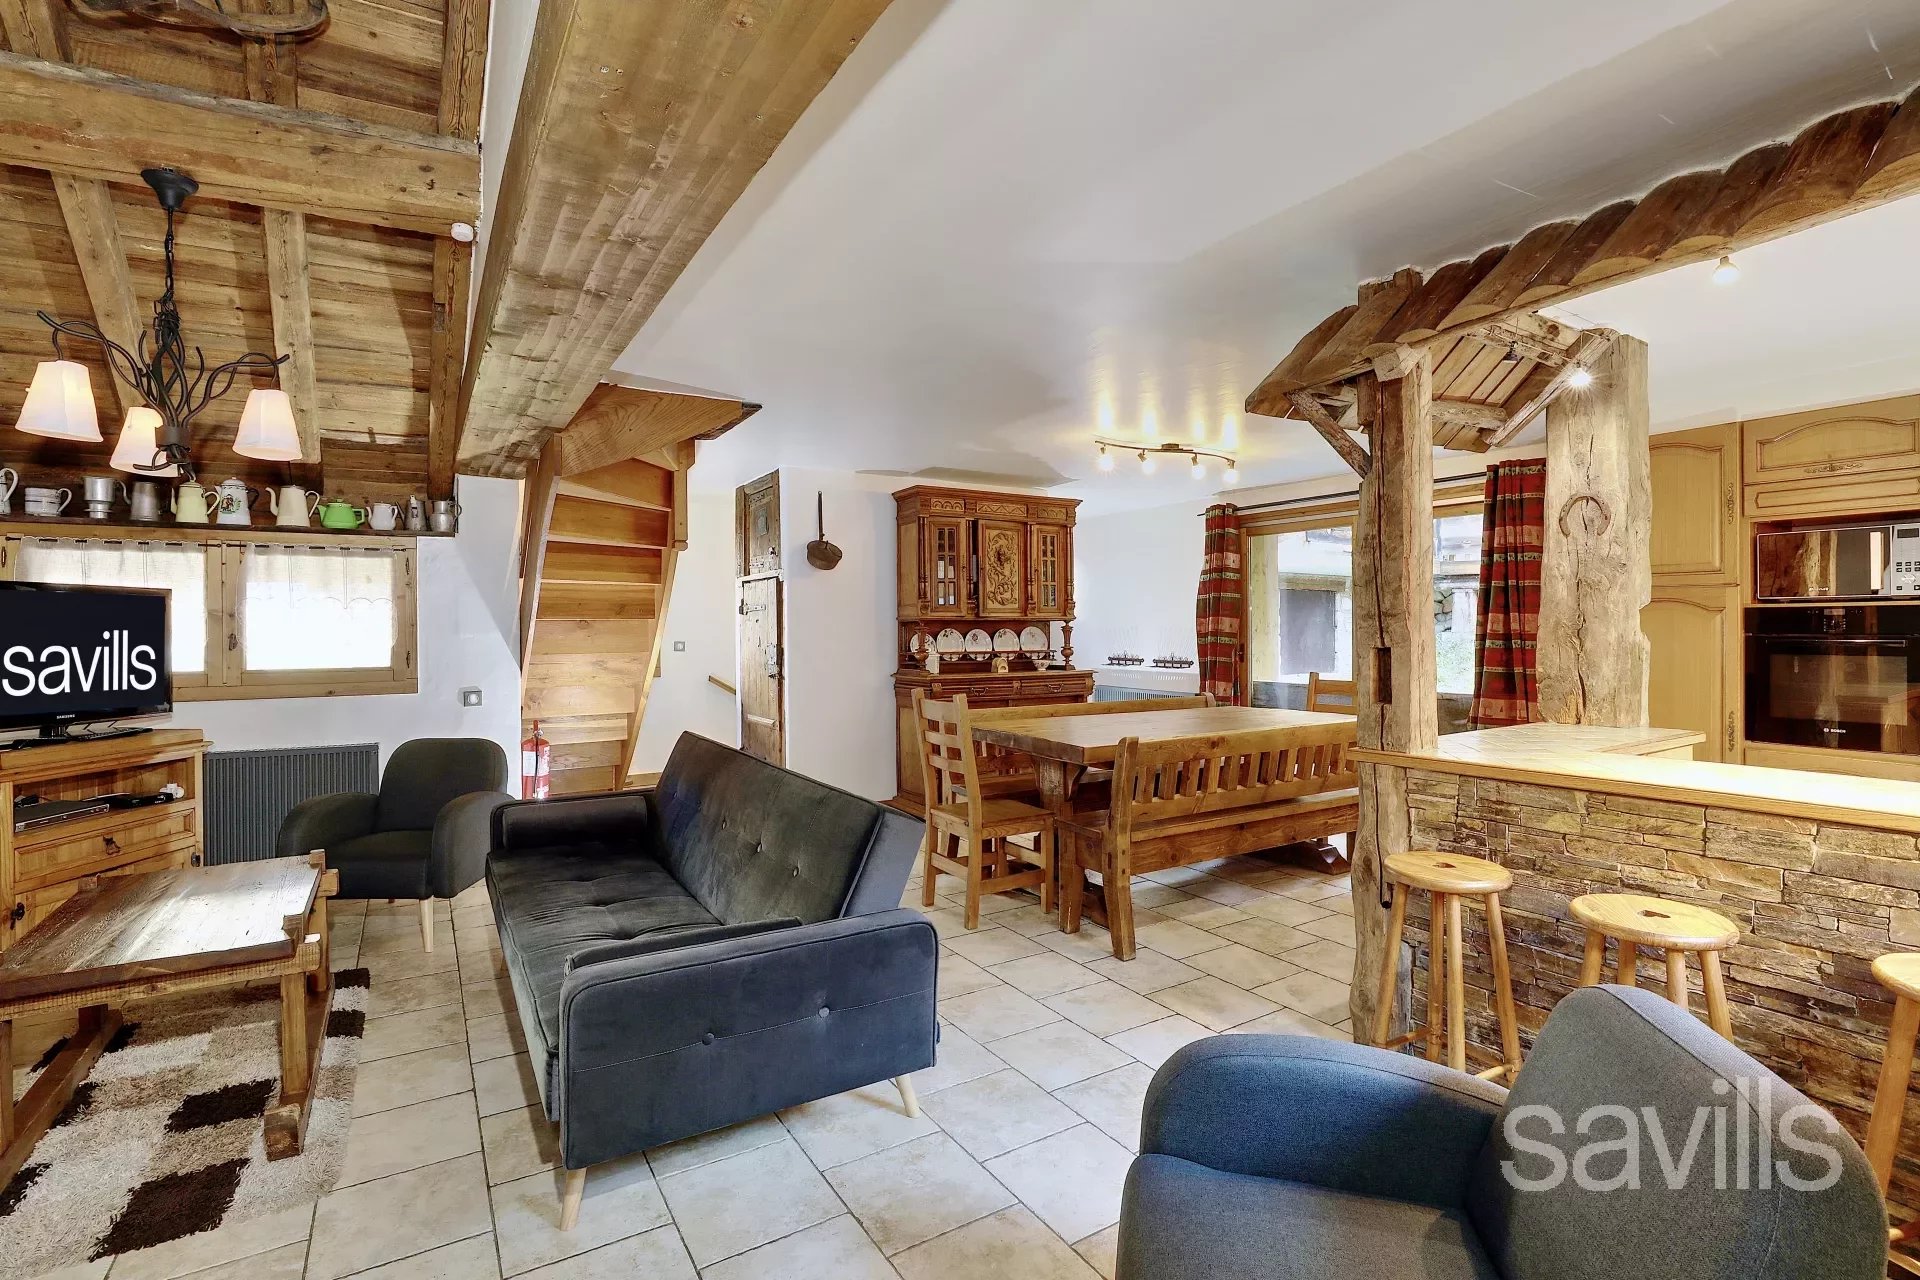 Three bedroom chalet in the heart of Mussillon, ideally situated for the centre of Meribel.